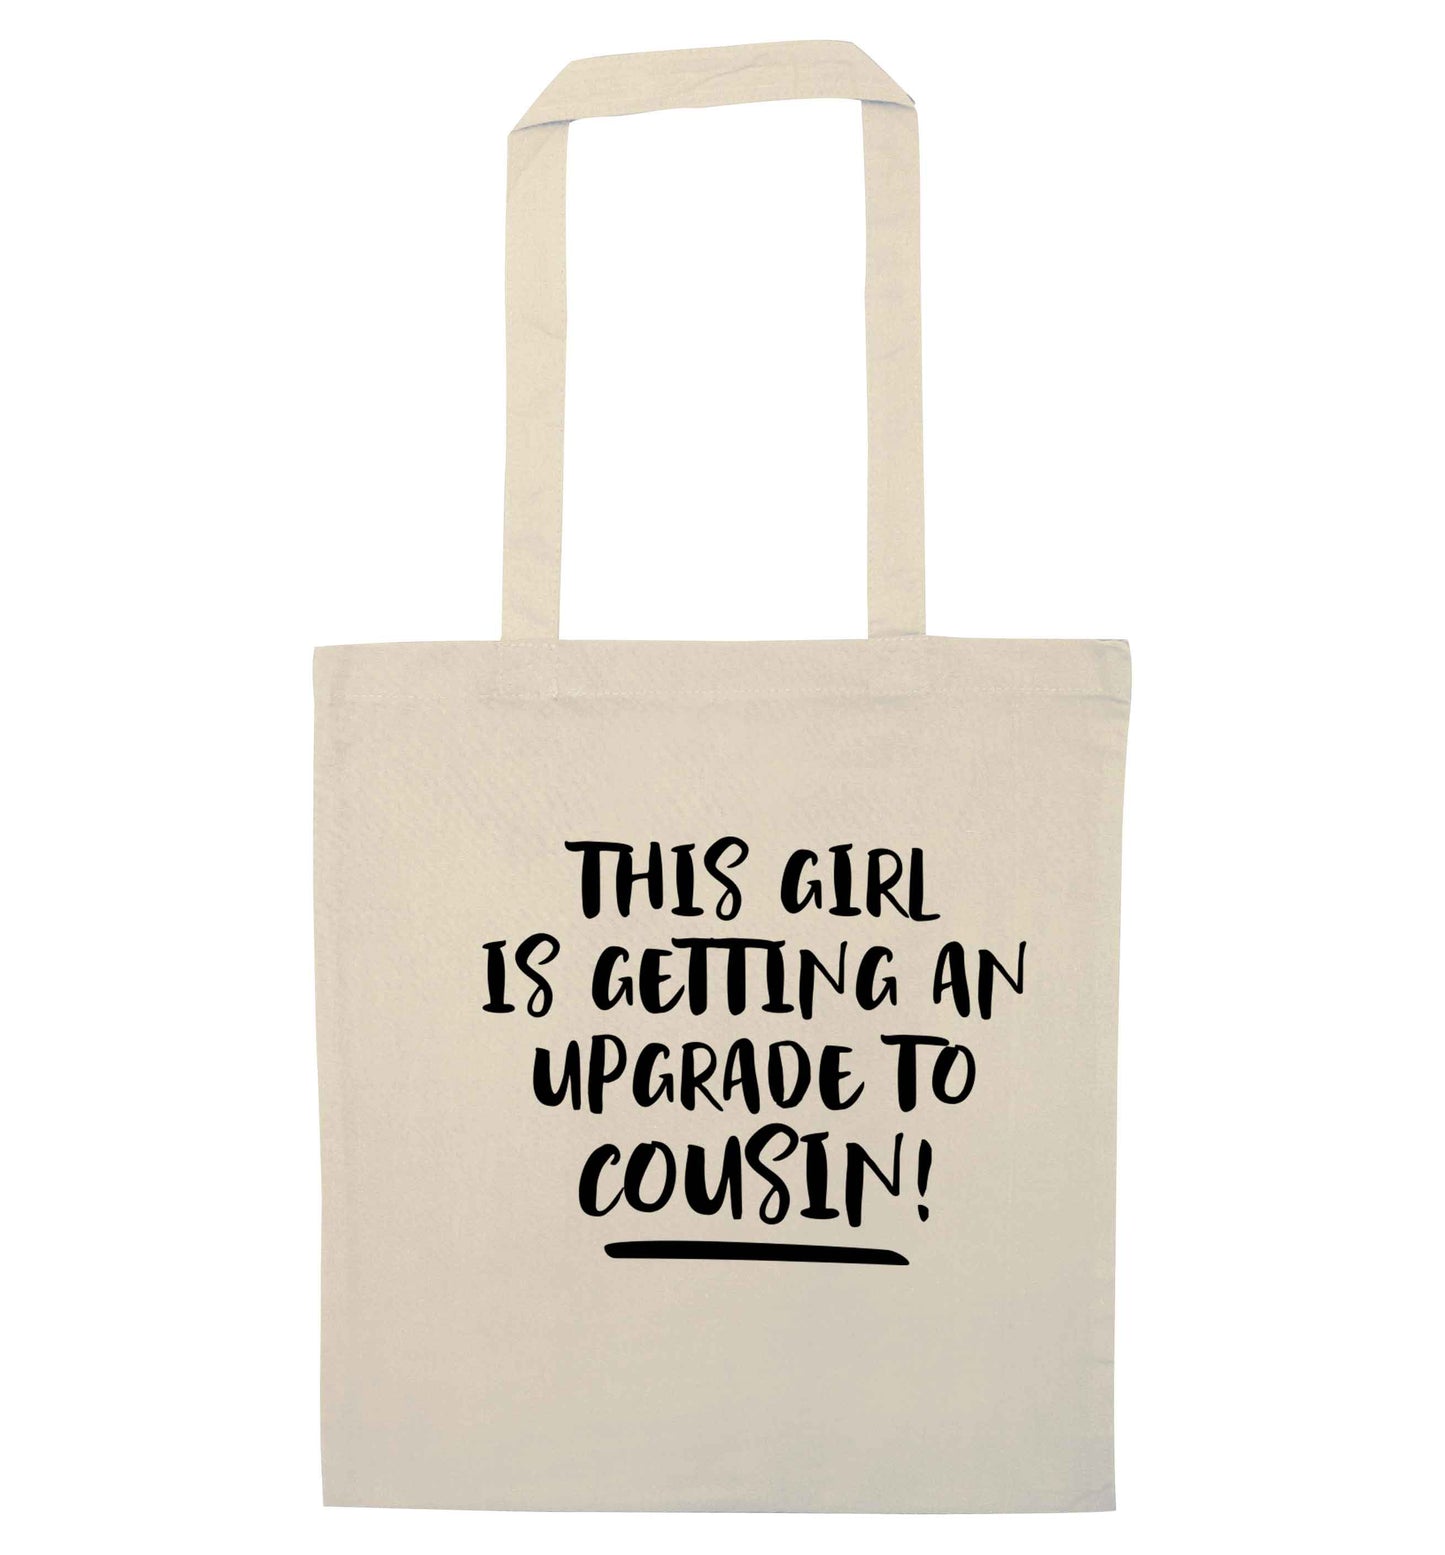 This girl is getting an upgrade to cousin! natural tote bag